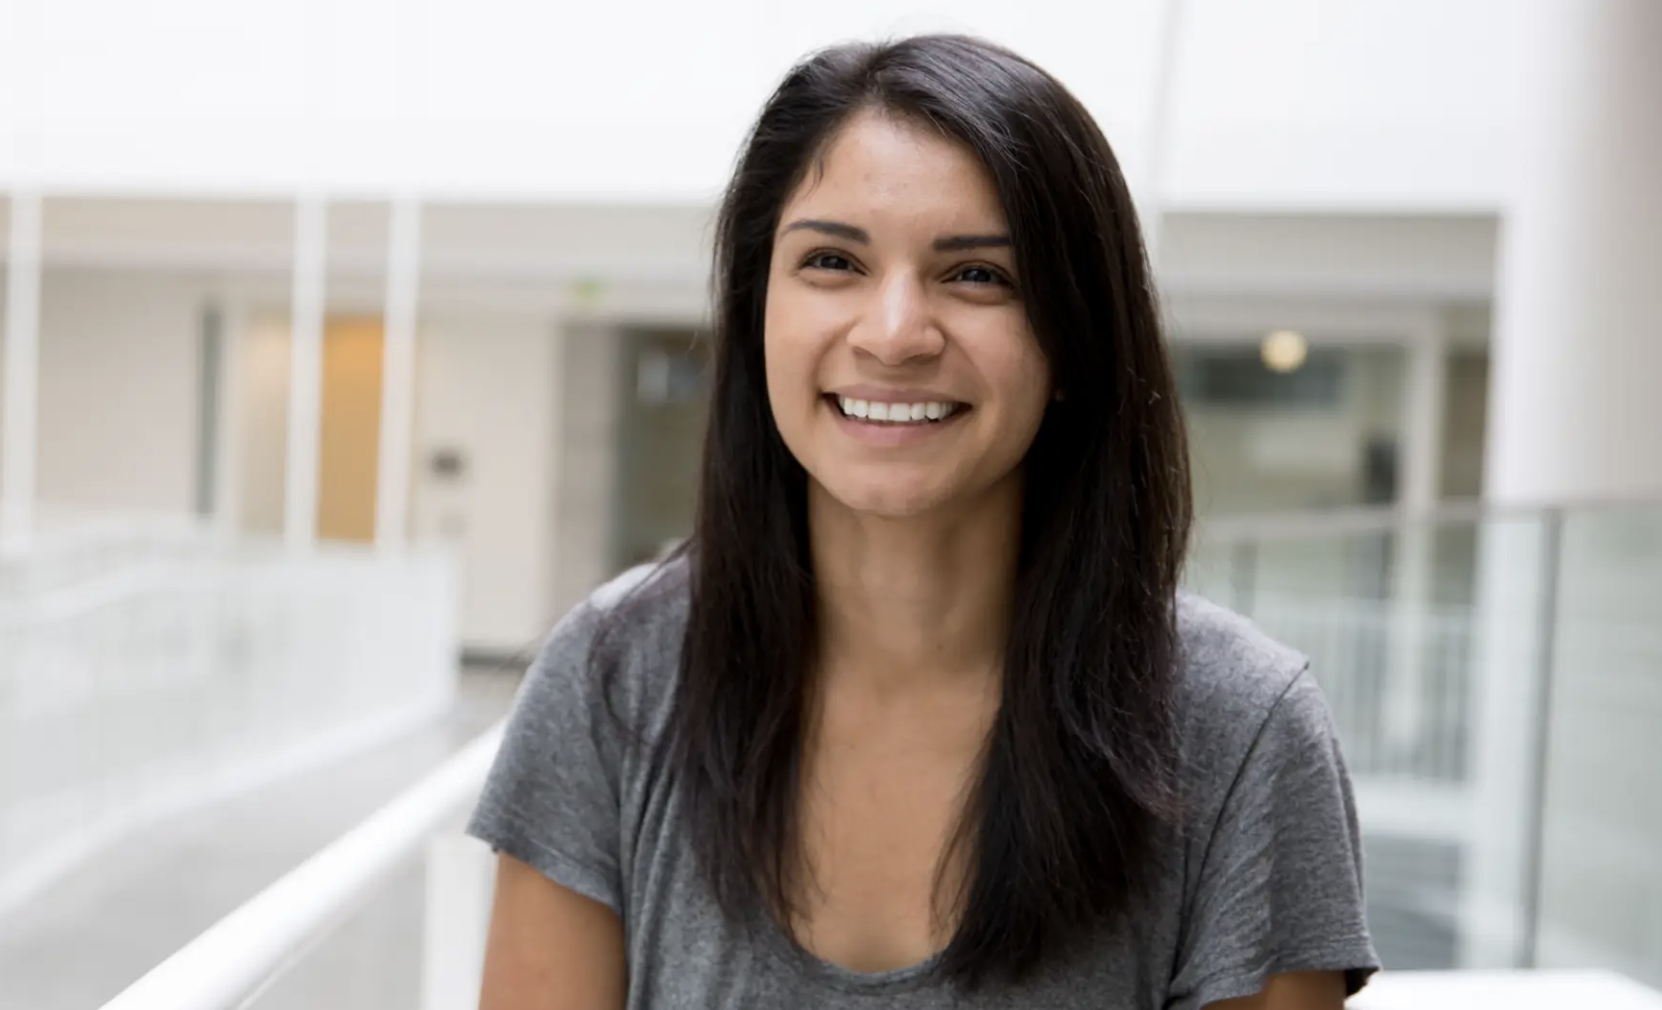 Q&A with Miriam: First-year student at OHSU School of Medicine